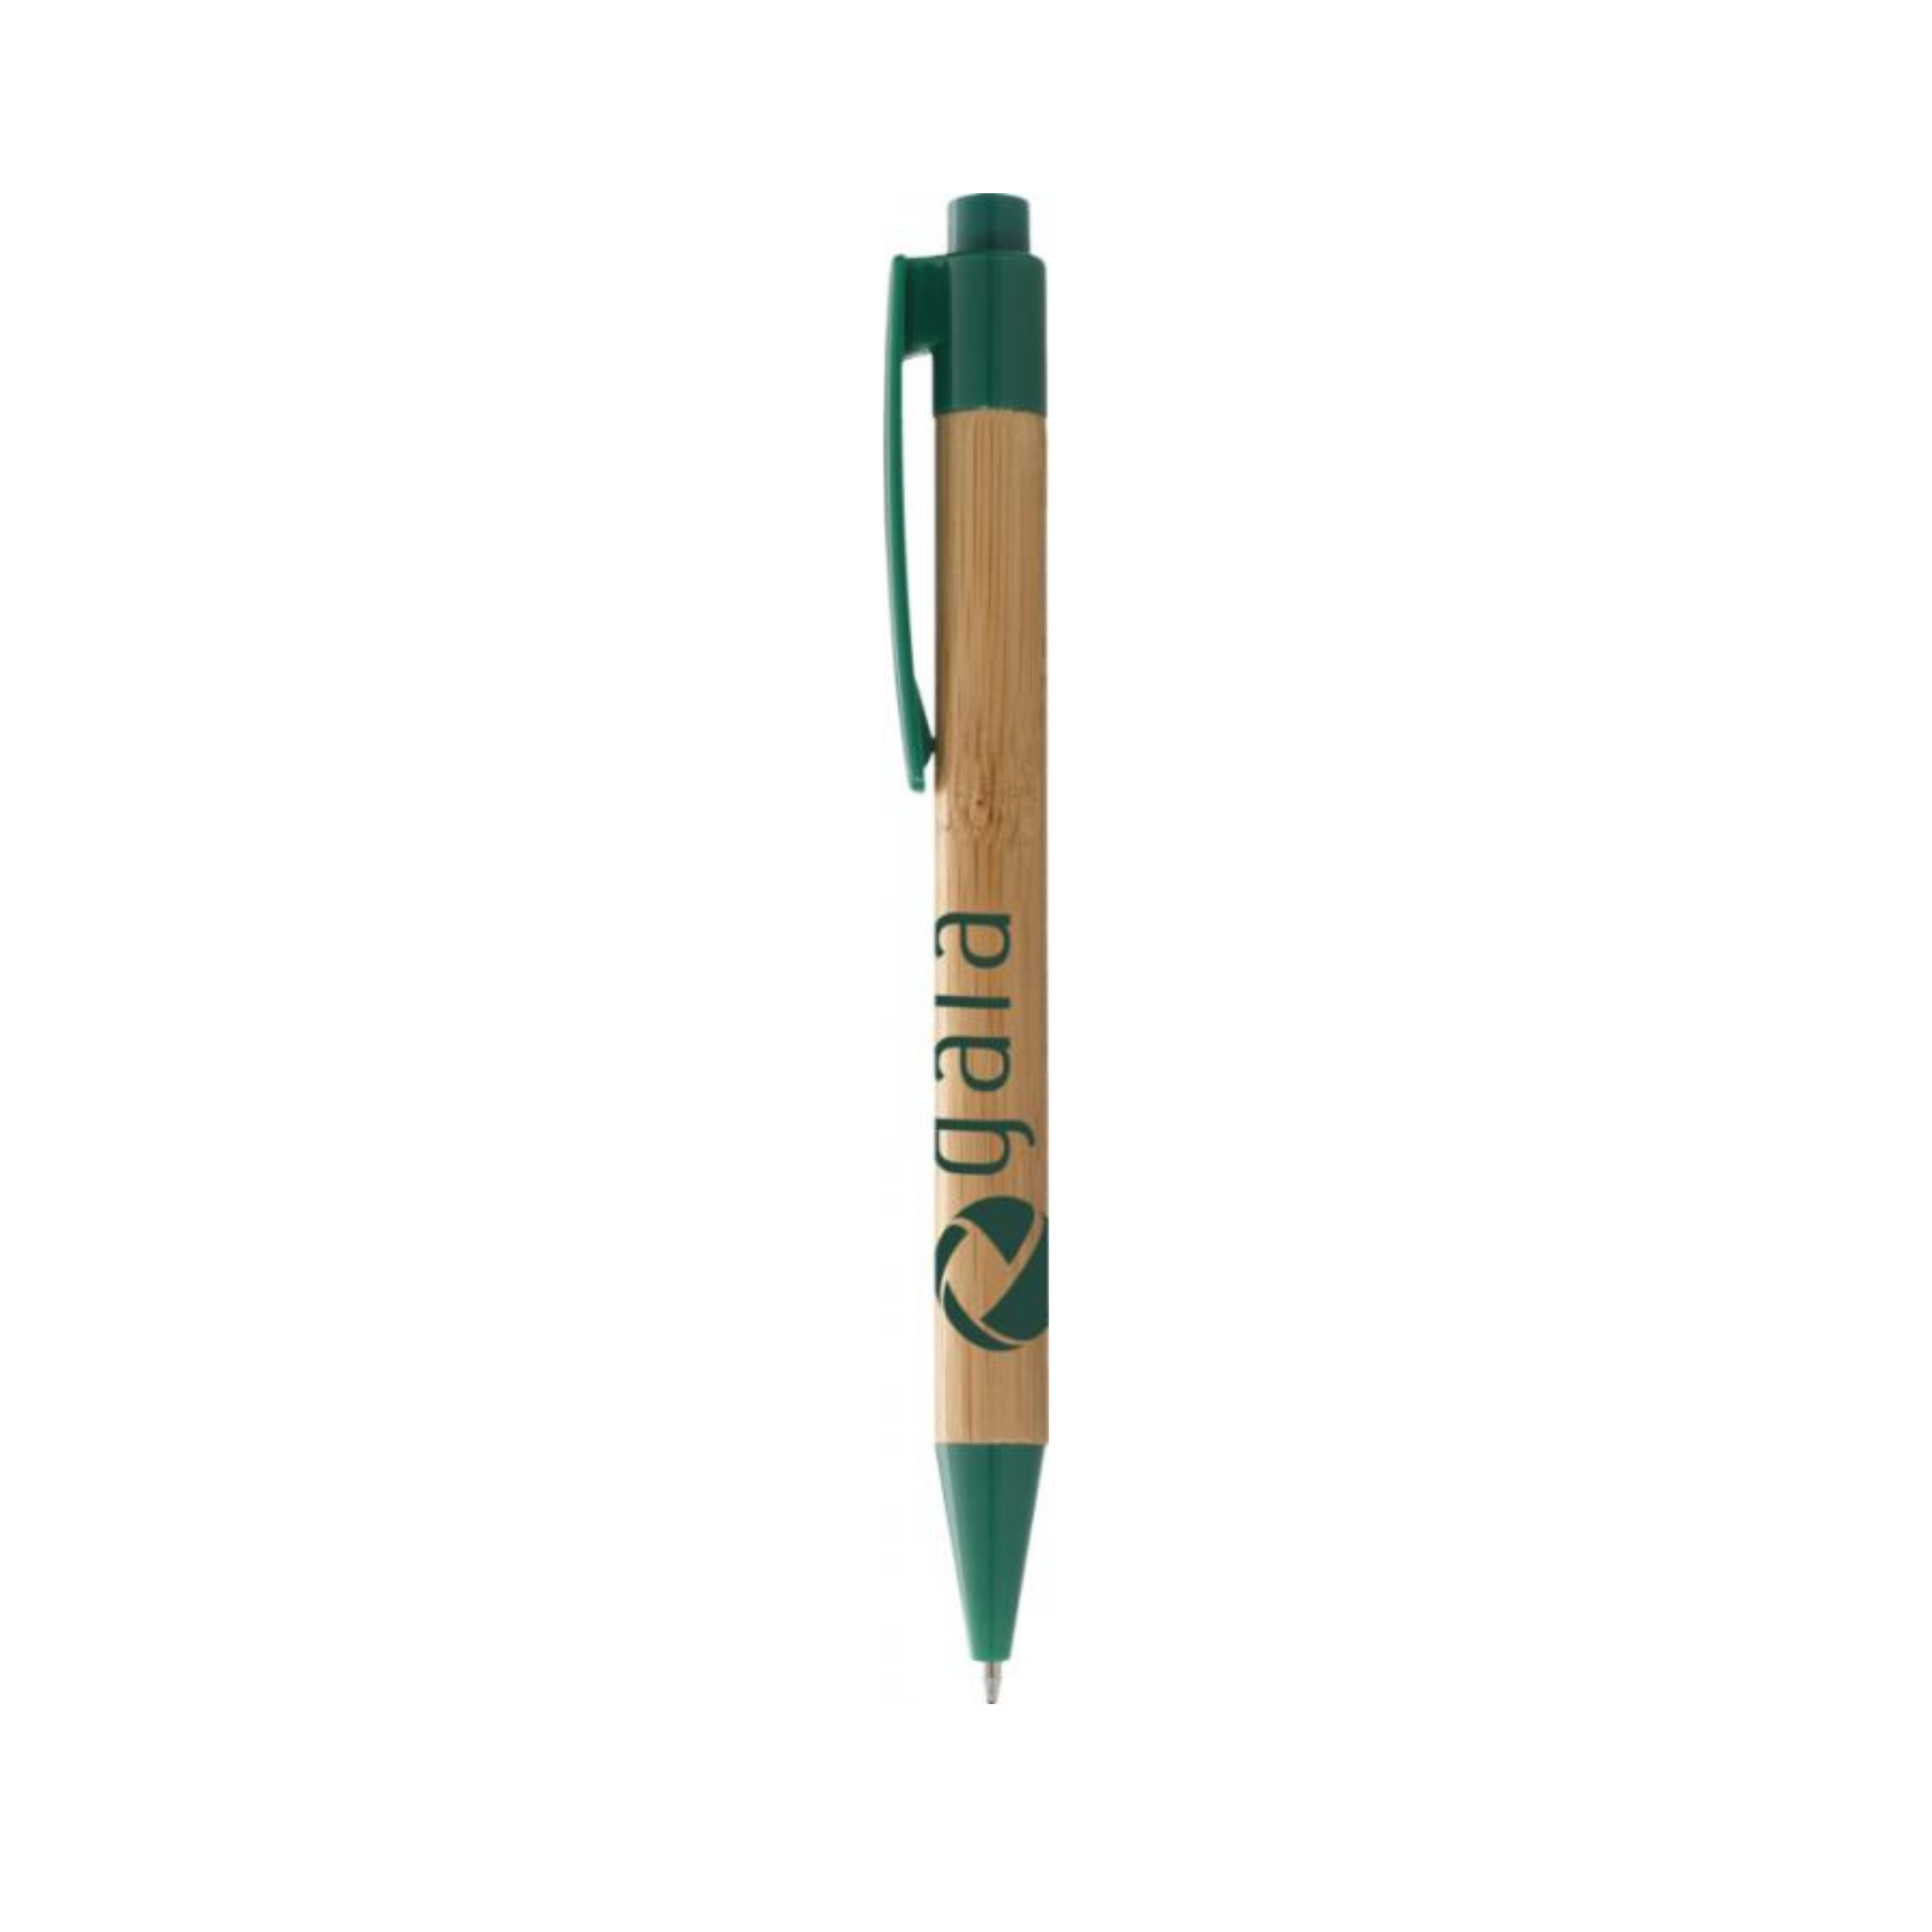 Borneo Bamboo Pen - From £0.72